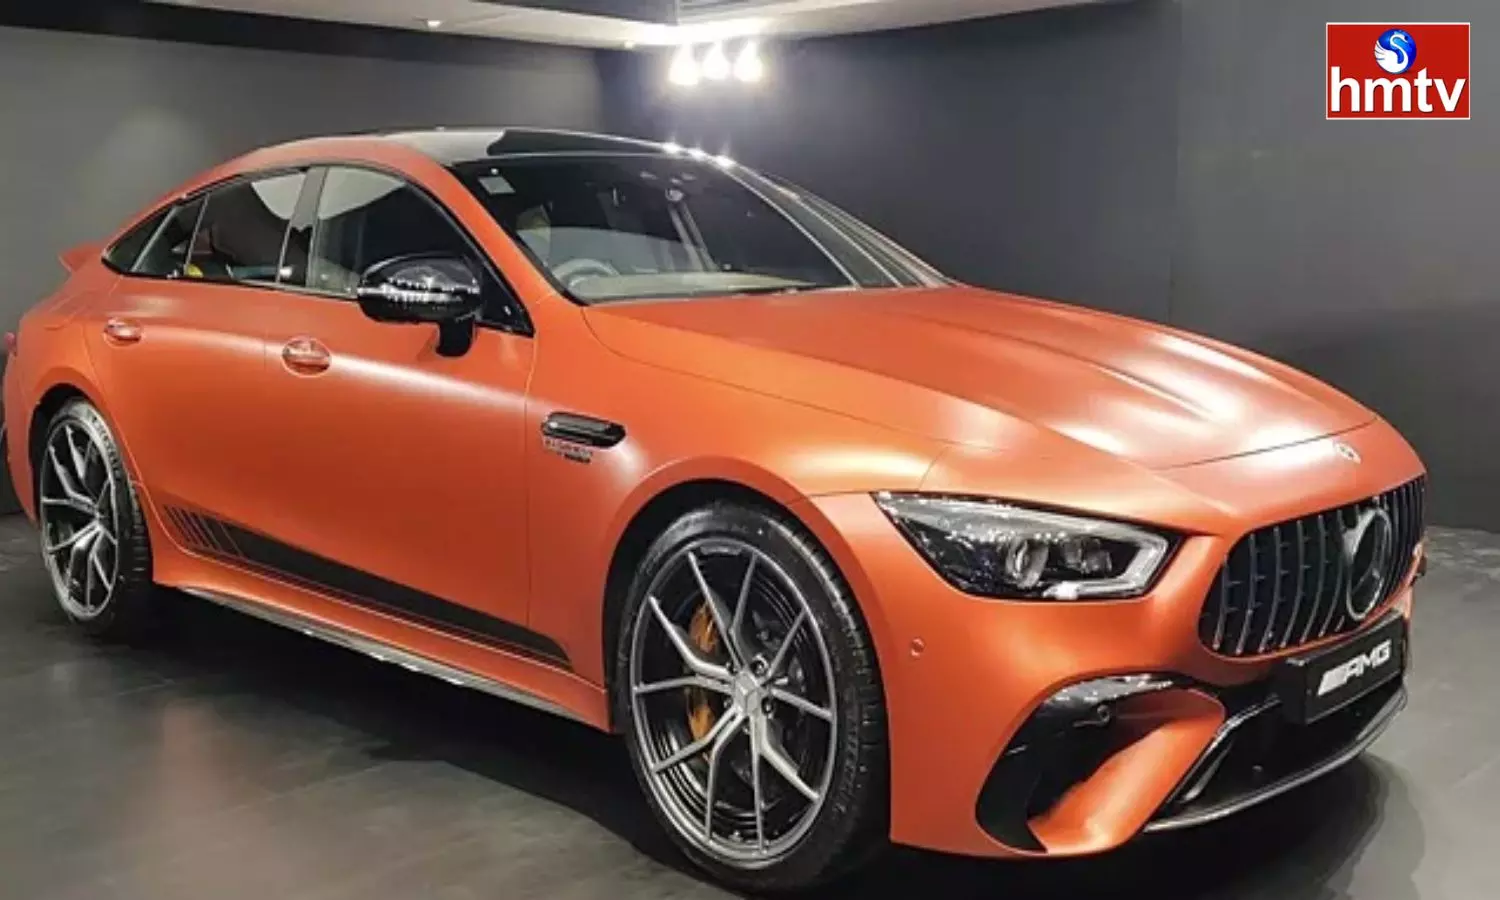 Mercedes Benz Revealed New Amg Gt 63 s e Performance Check Price And Features